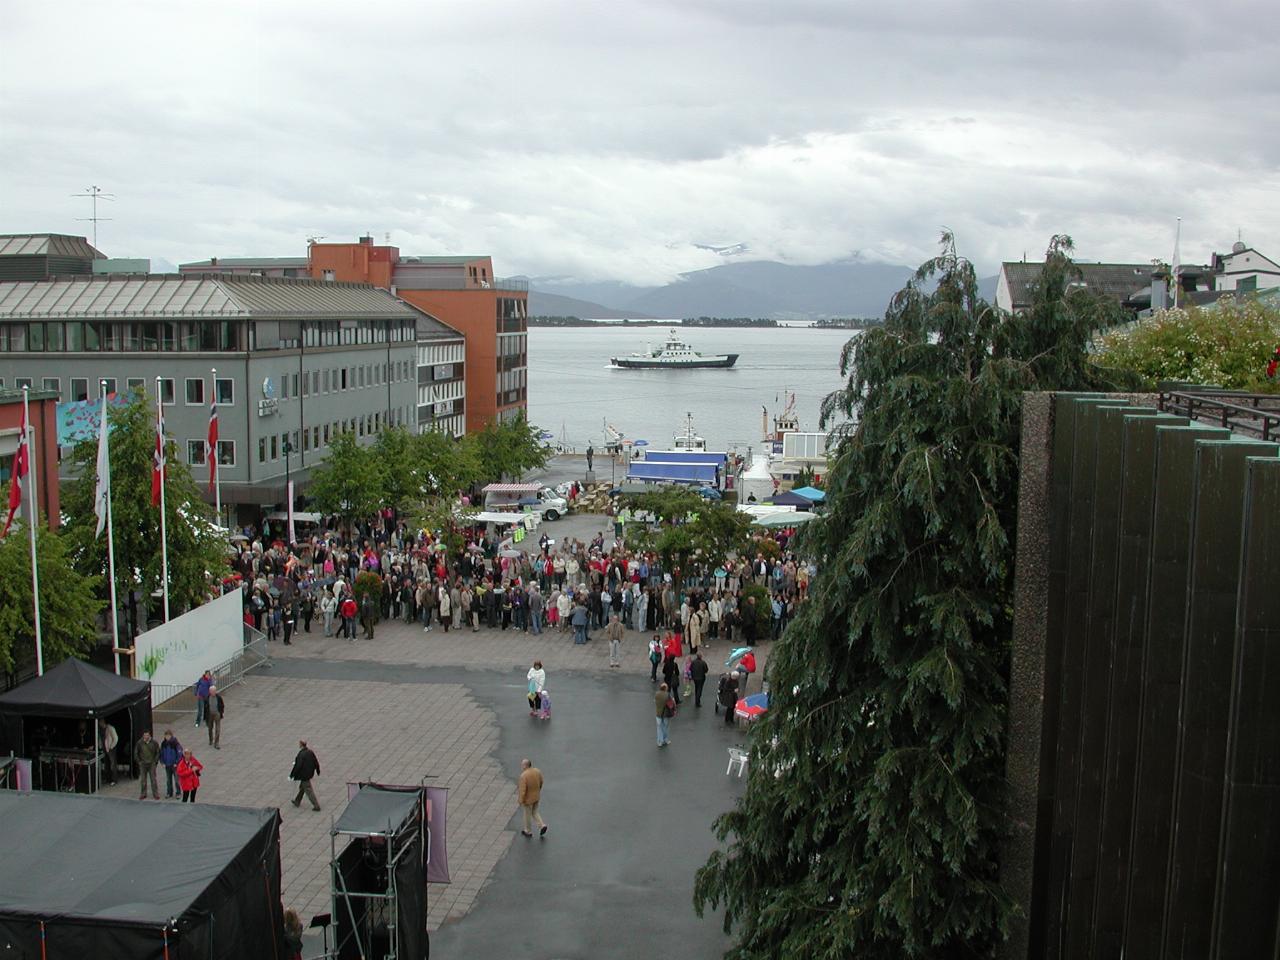 KPLU Viking Jazz: Crowds anticipating the arrival of the Parade in front of the Town Hall, Molde